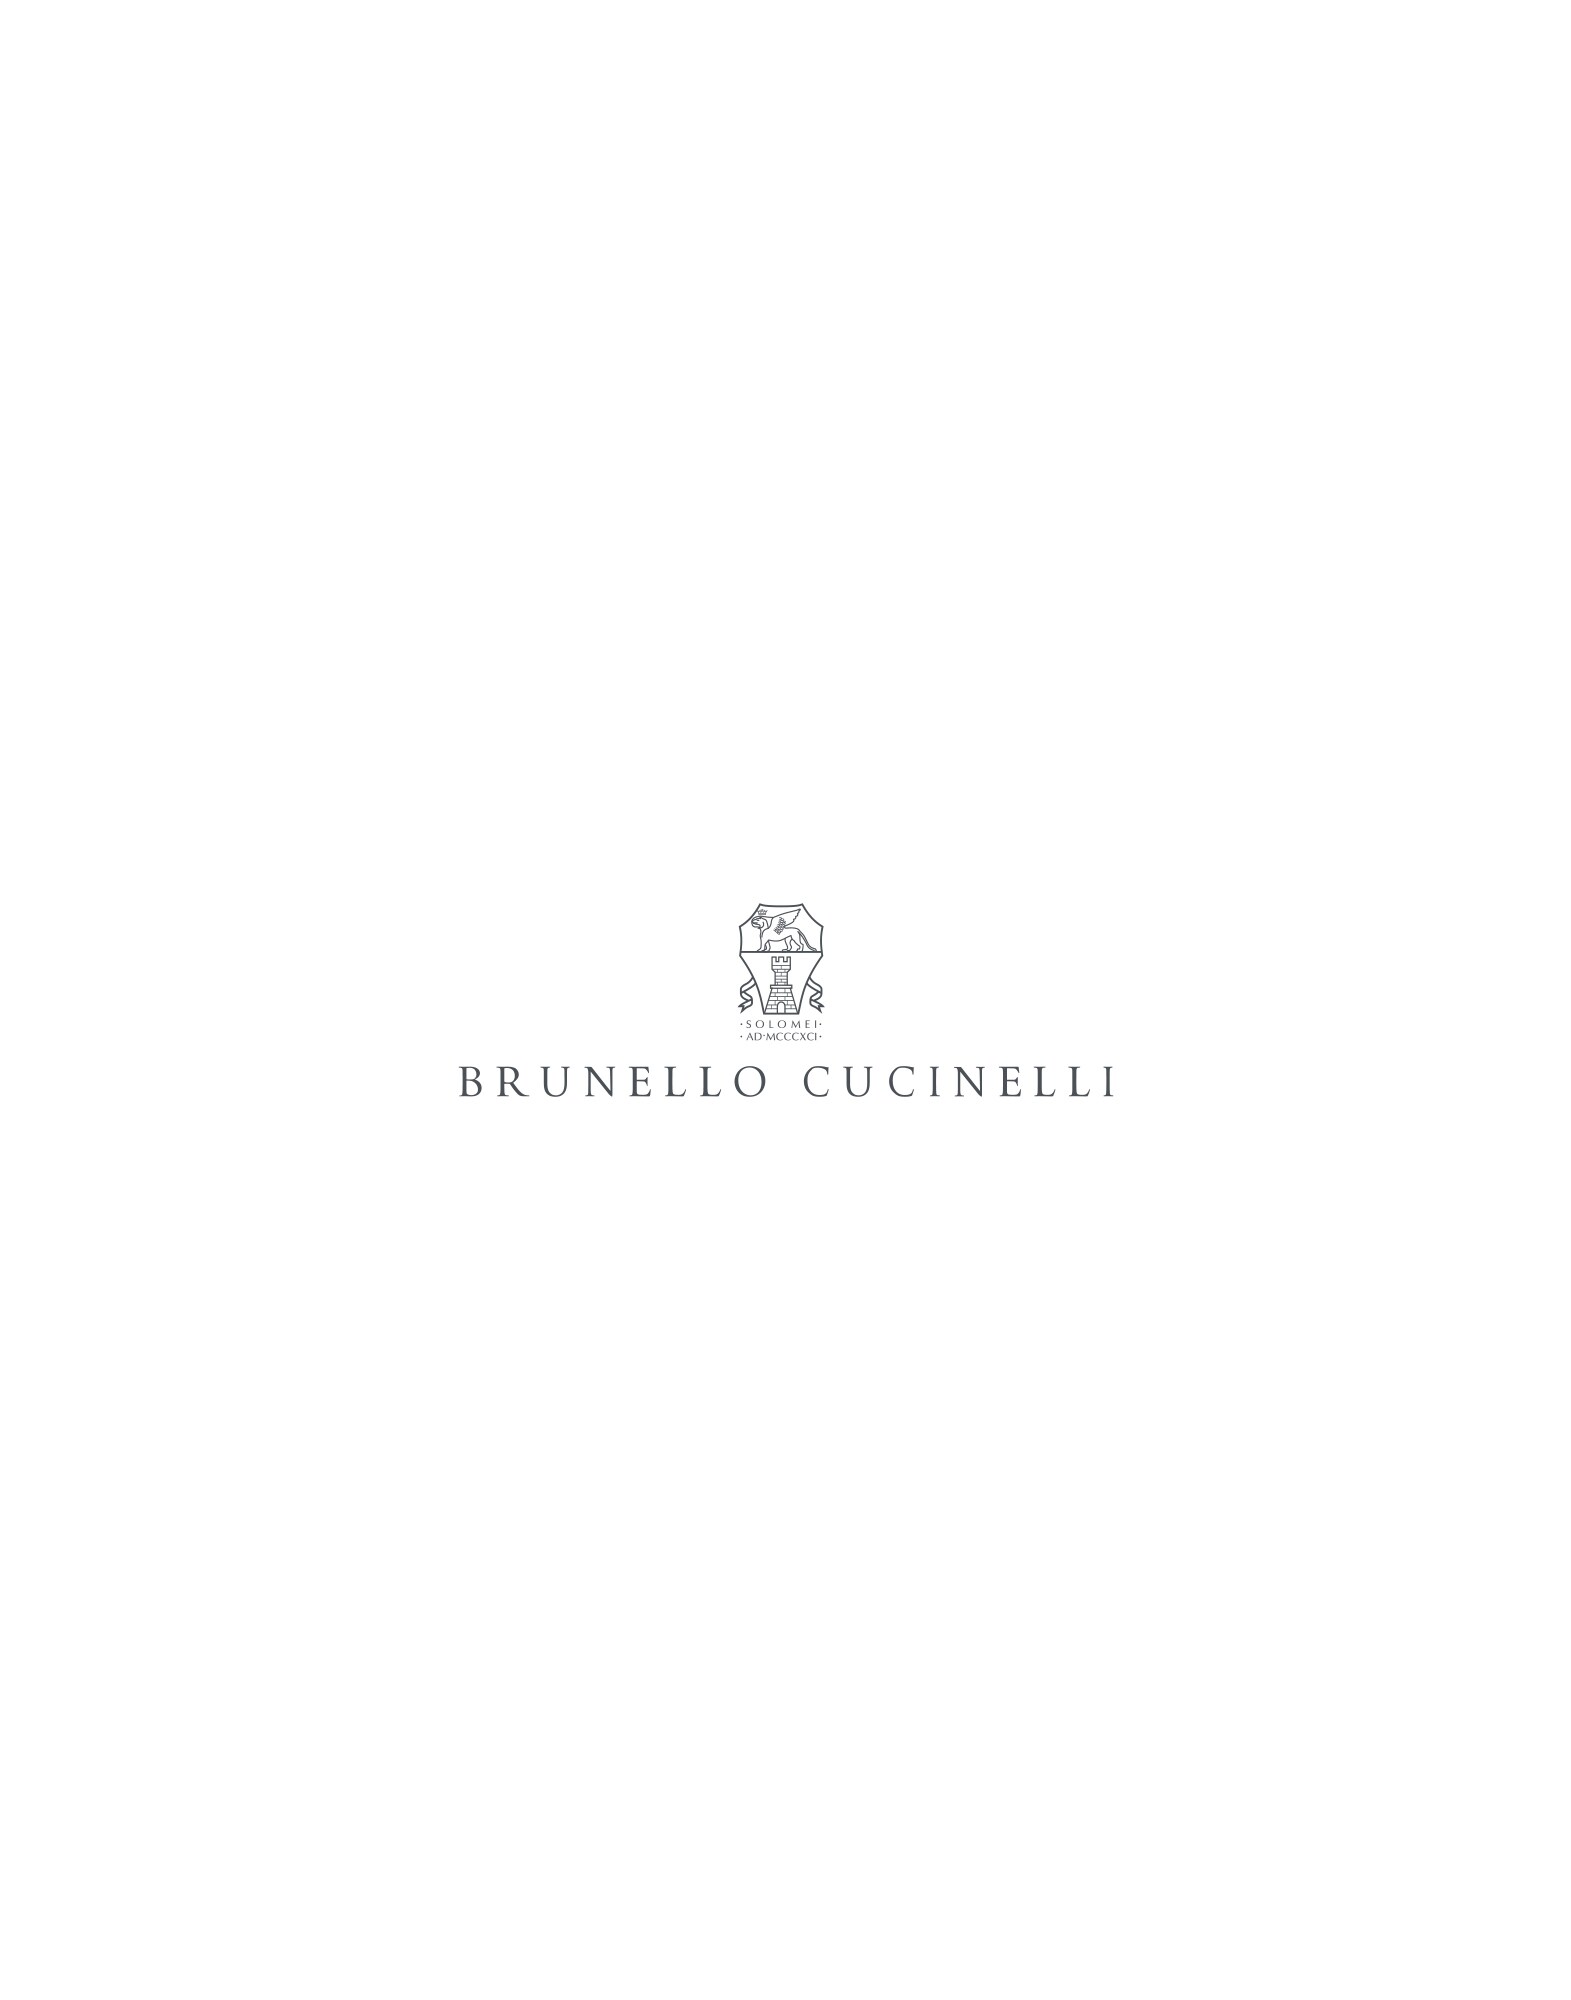 Discover Look 232MOUTFITMQ435LDWHC2893 - Brunello Cucinelli